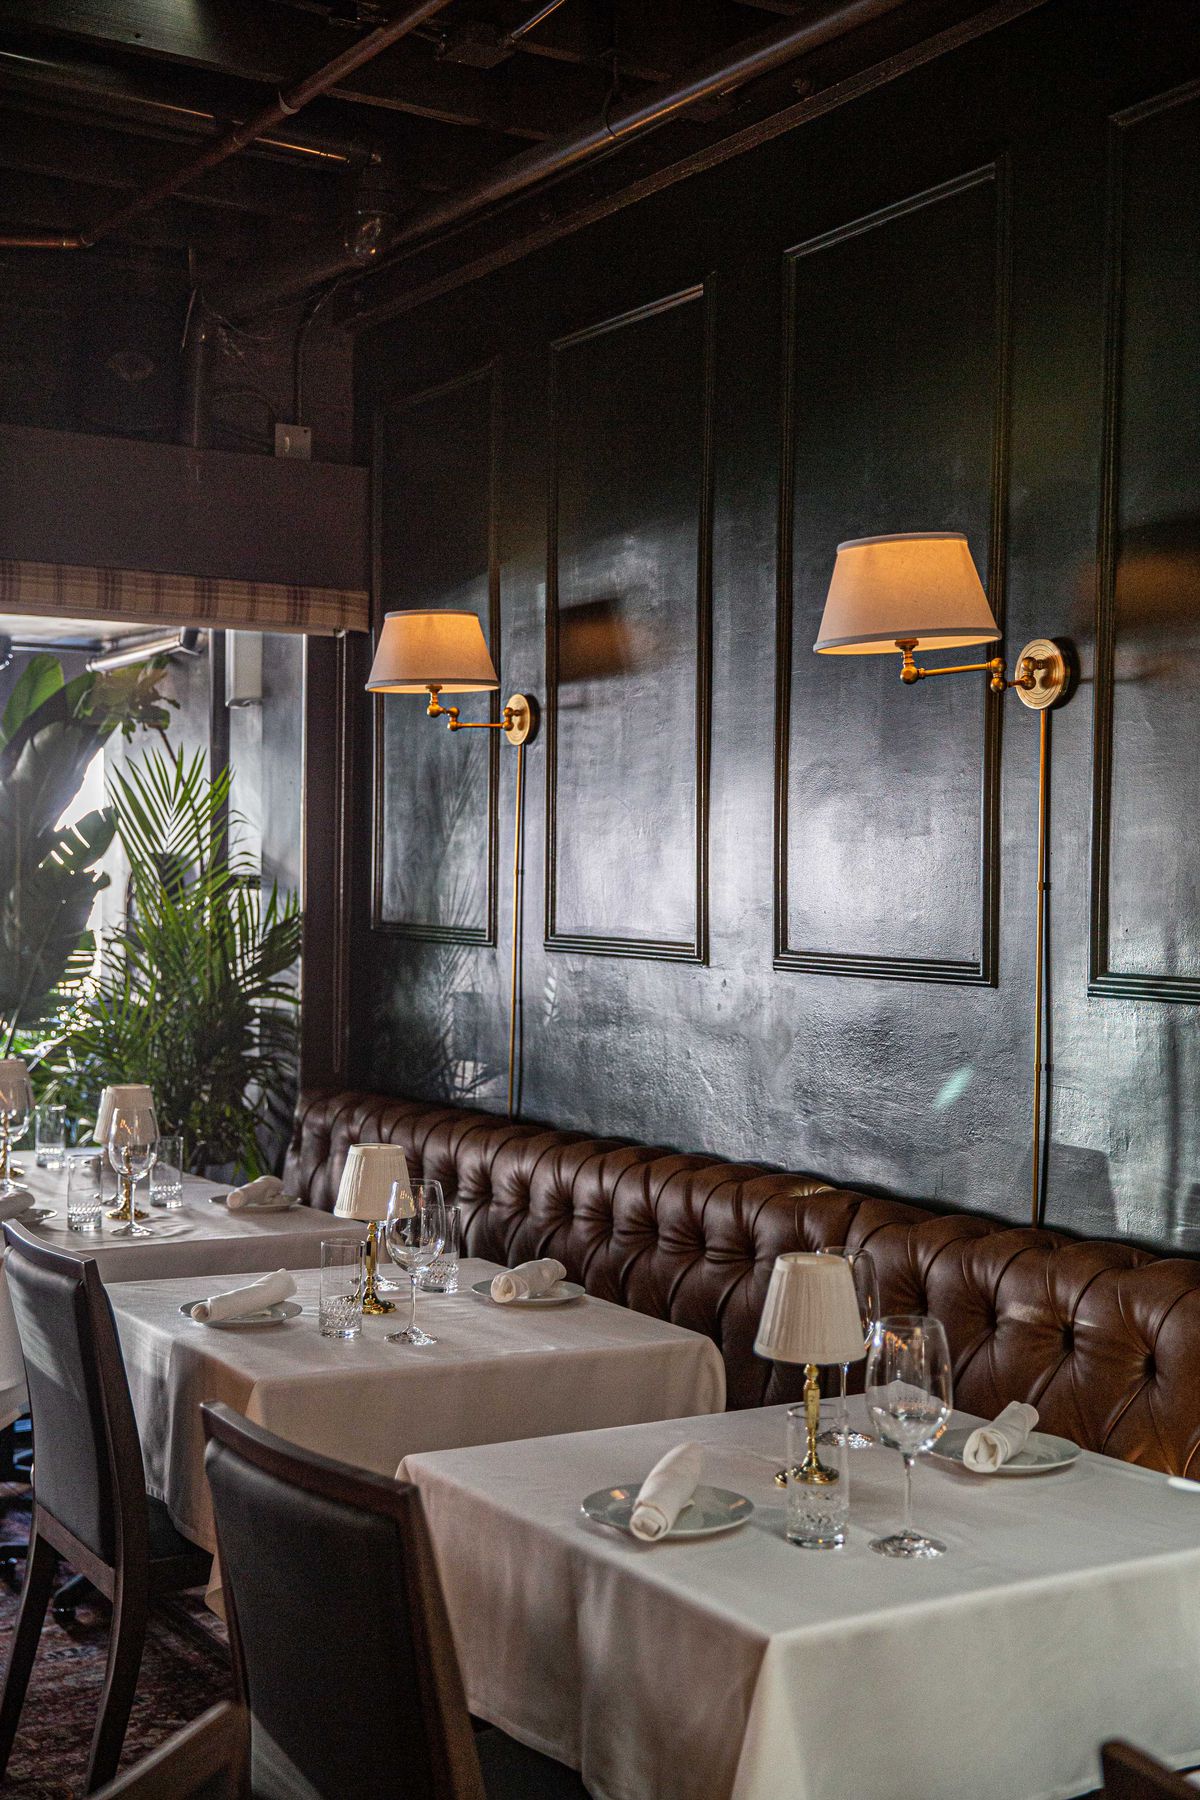 Dim lighting and dark walls at a new steakhouse with long banquette and table lamps.